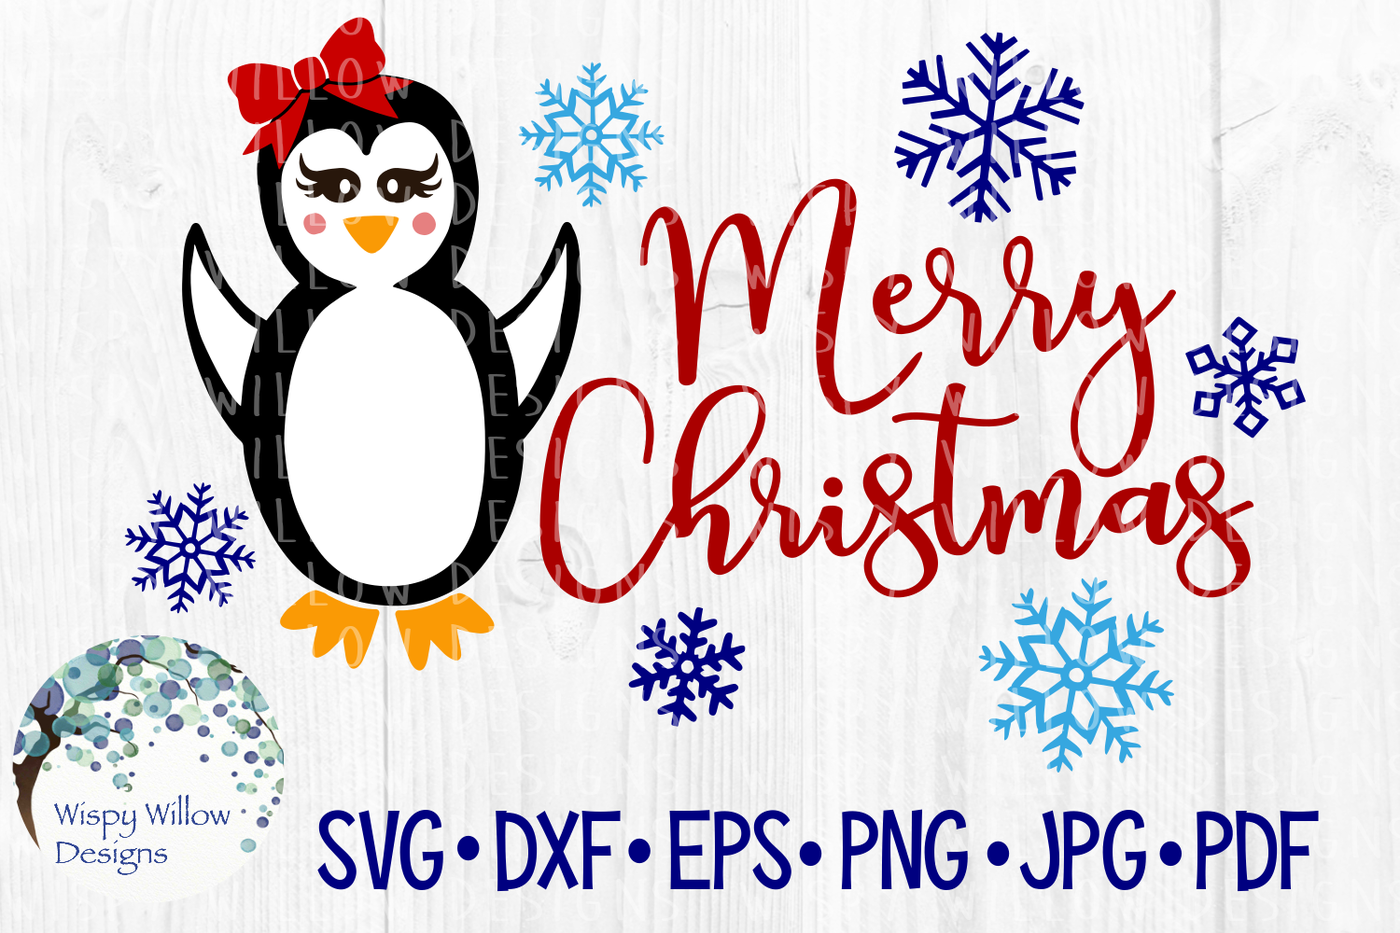 Download Merry Christmas Penguin Holiday Snowflake Svg Dxf Eps Png Jpg Pdf By Wispy Willow Designs Thehungryjpeg Com